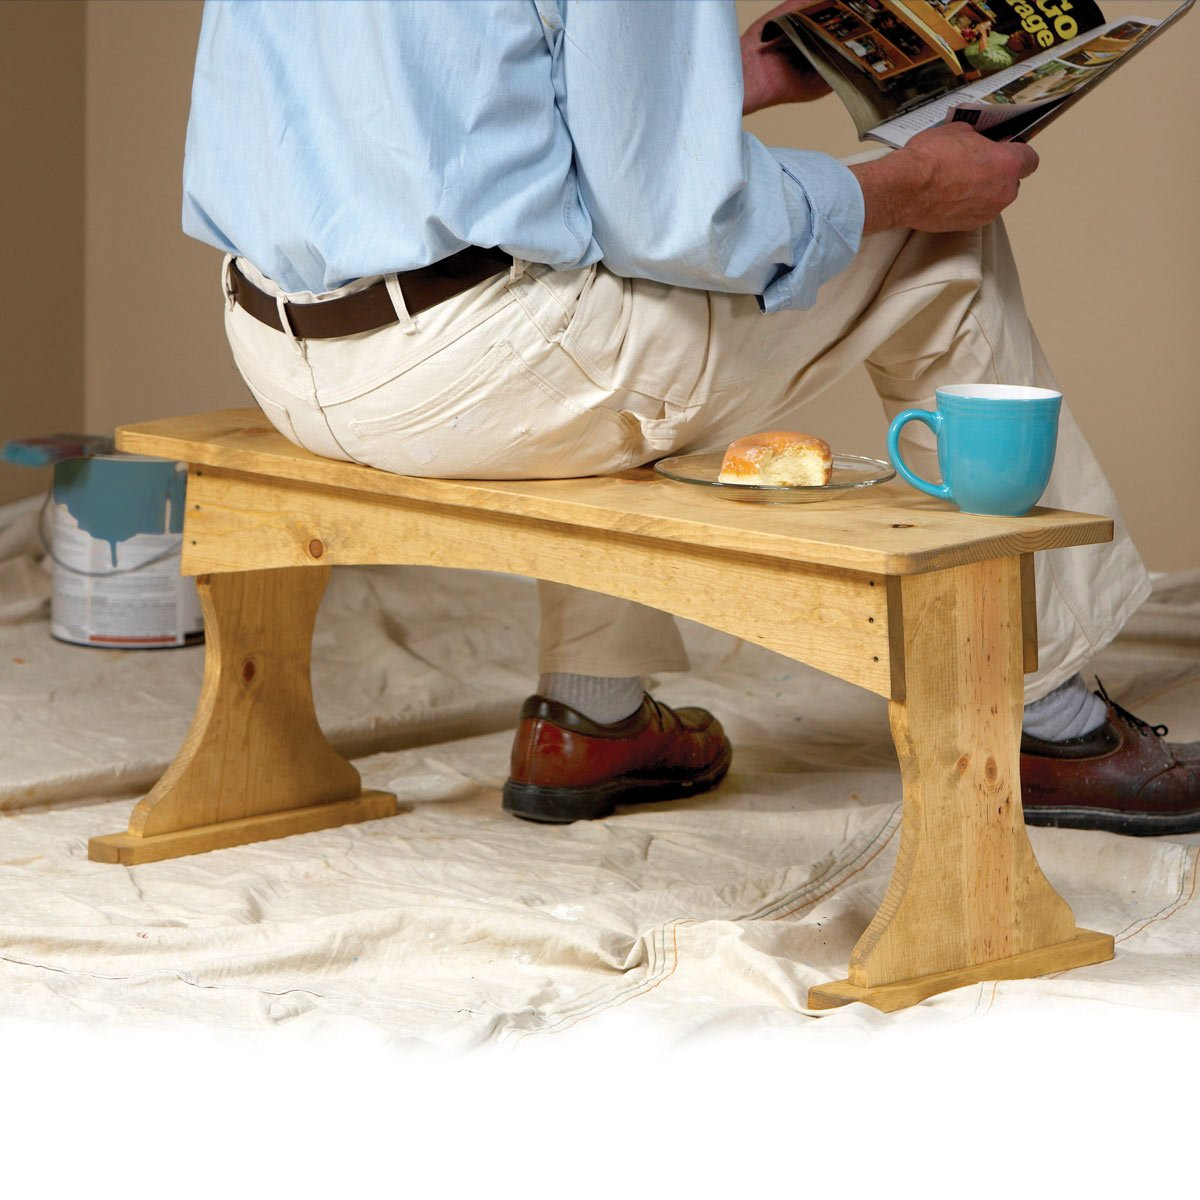 DIY Wood Working Projects
 The Top 10 DIY Wood Projects — The Family Handyman